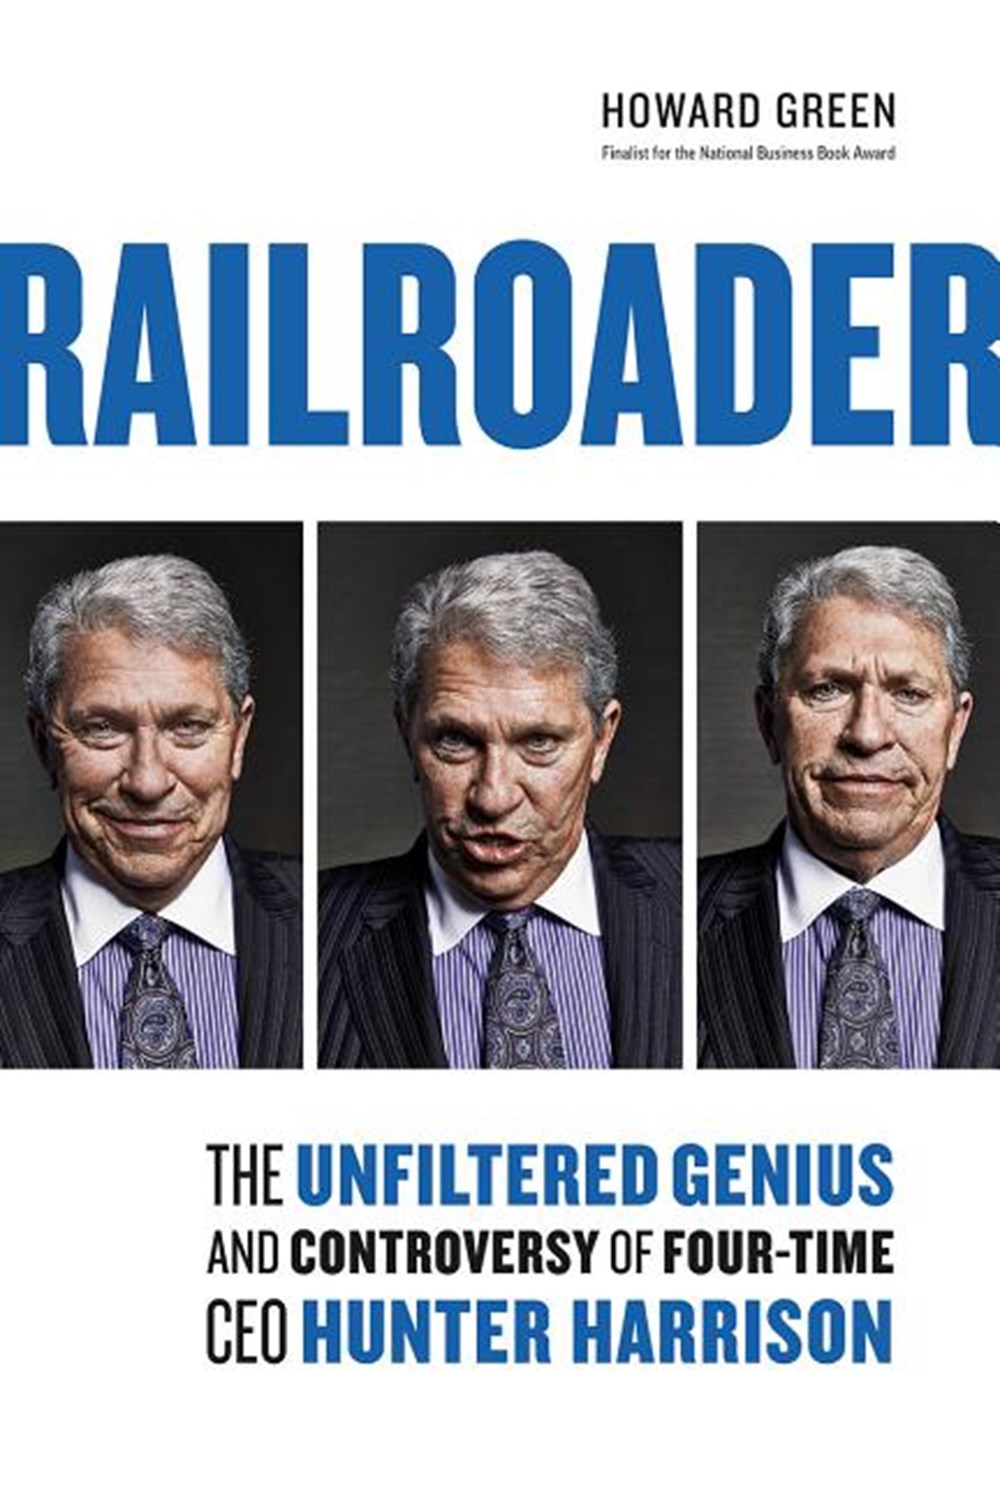 Railroader The Unfiltered Genius and Controversy of Four-Time CEO Hunter Harrison